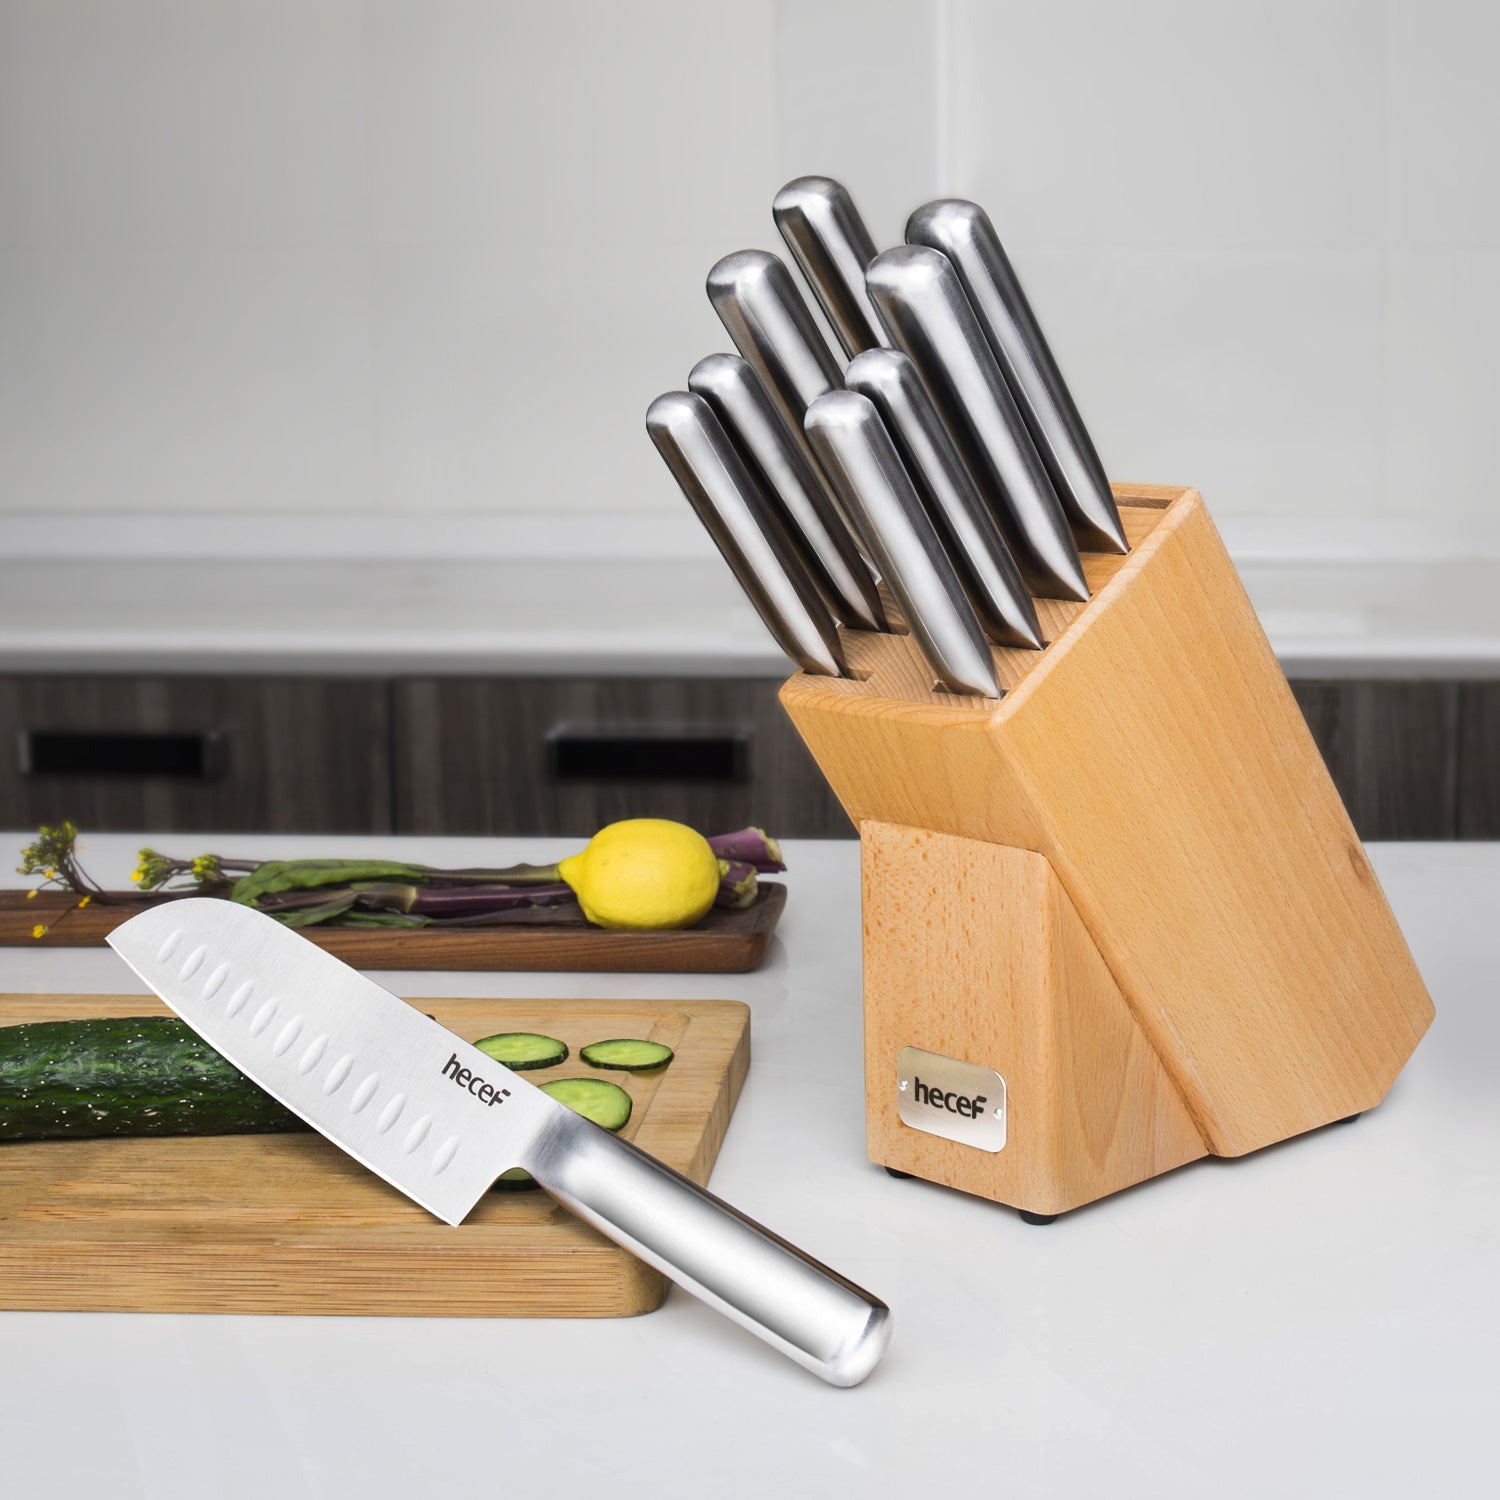 Hecef 6 Pieces Kitchen Knife Block Set, Satin Finished Stainless